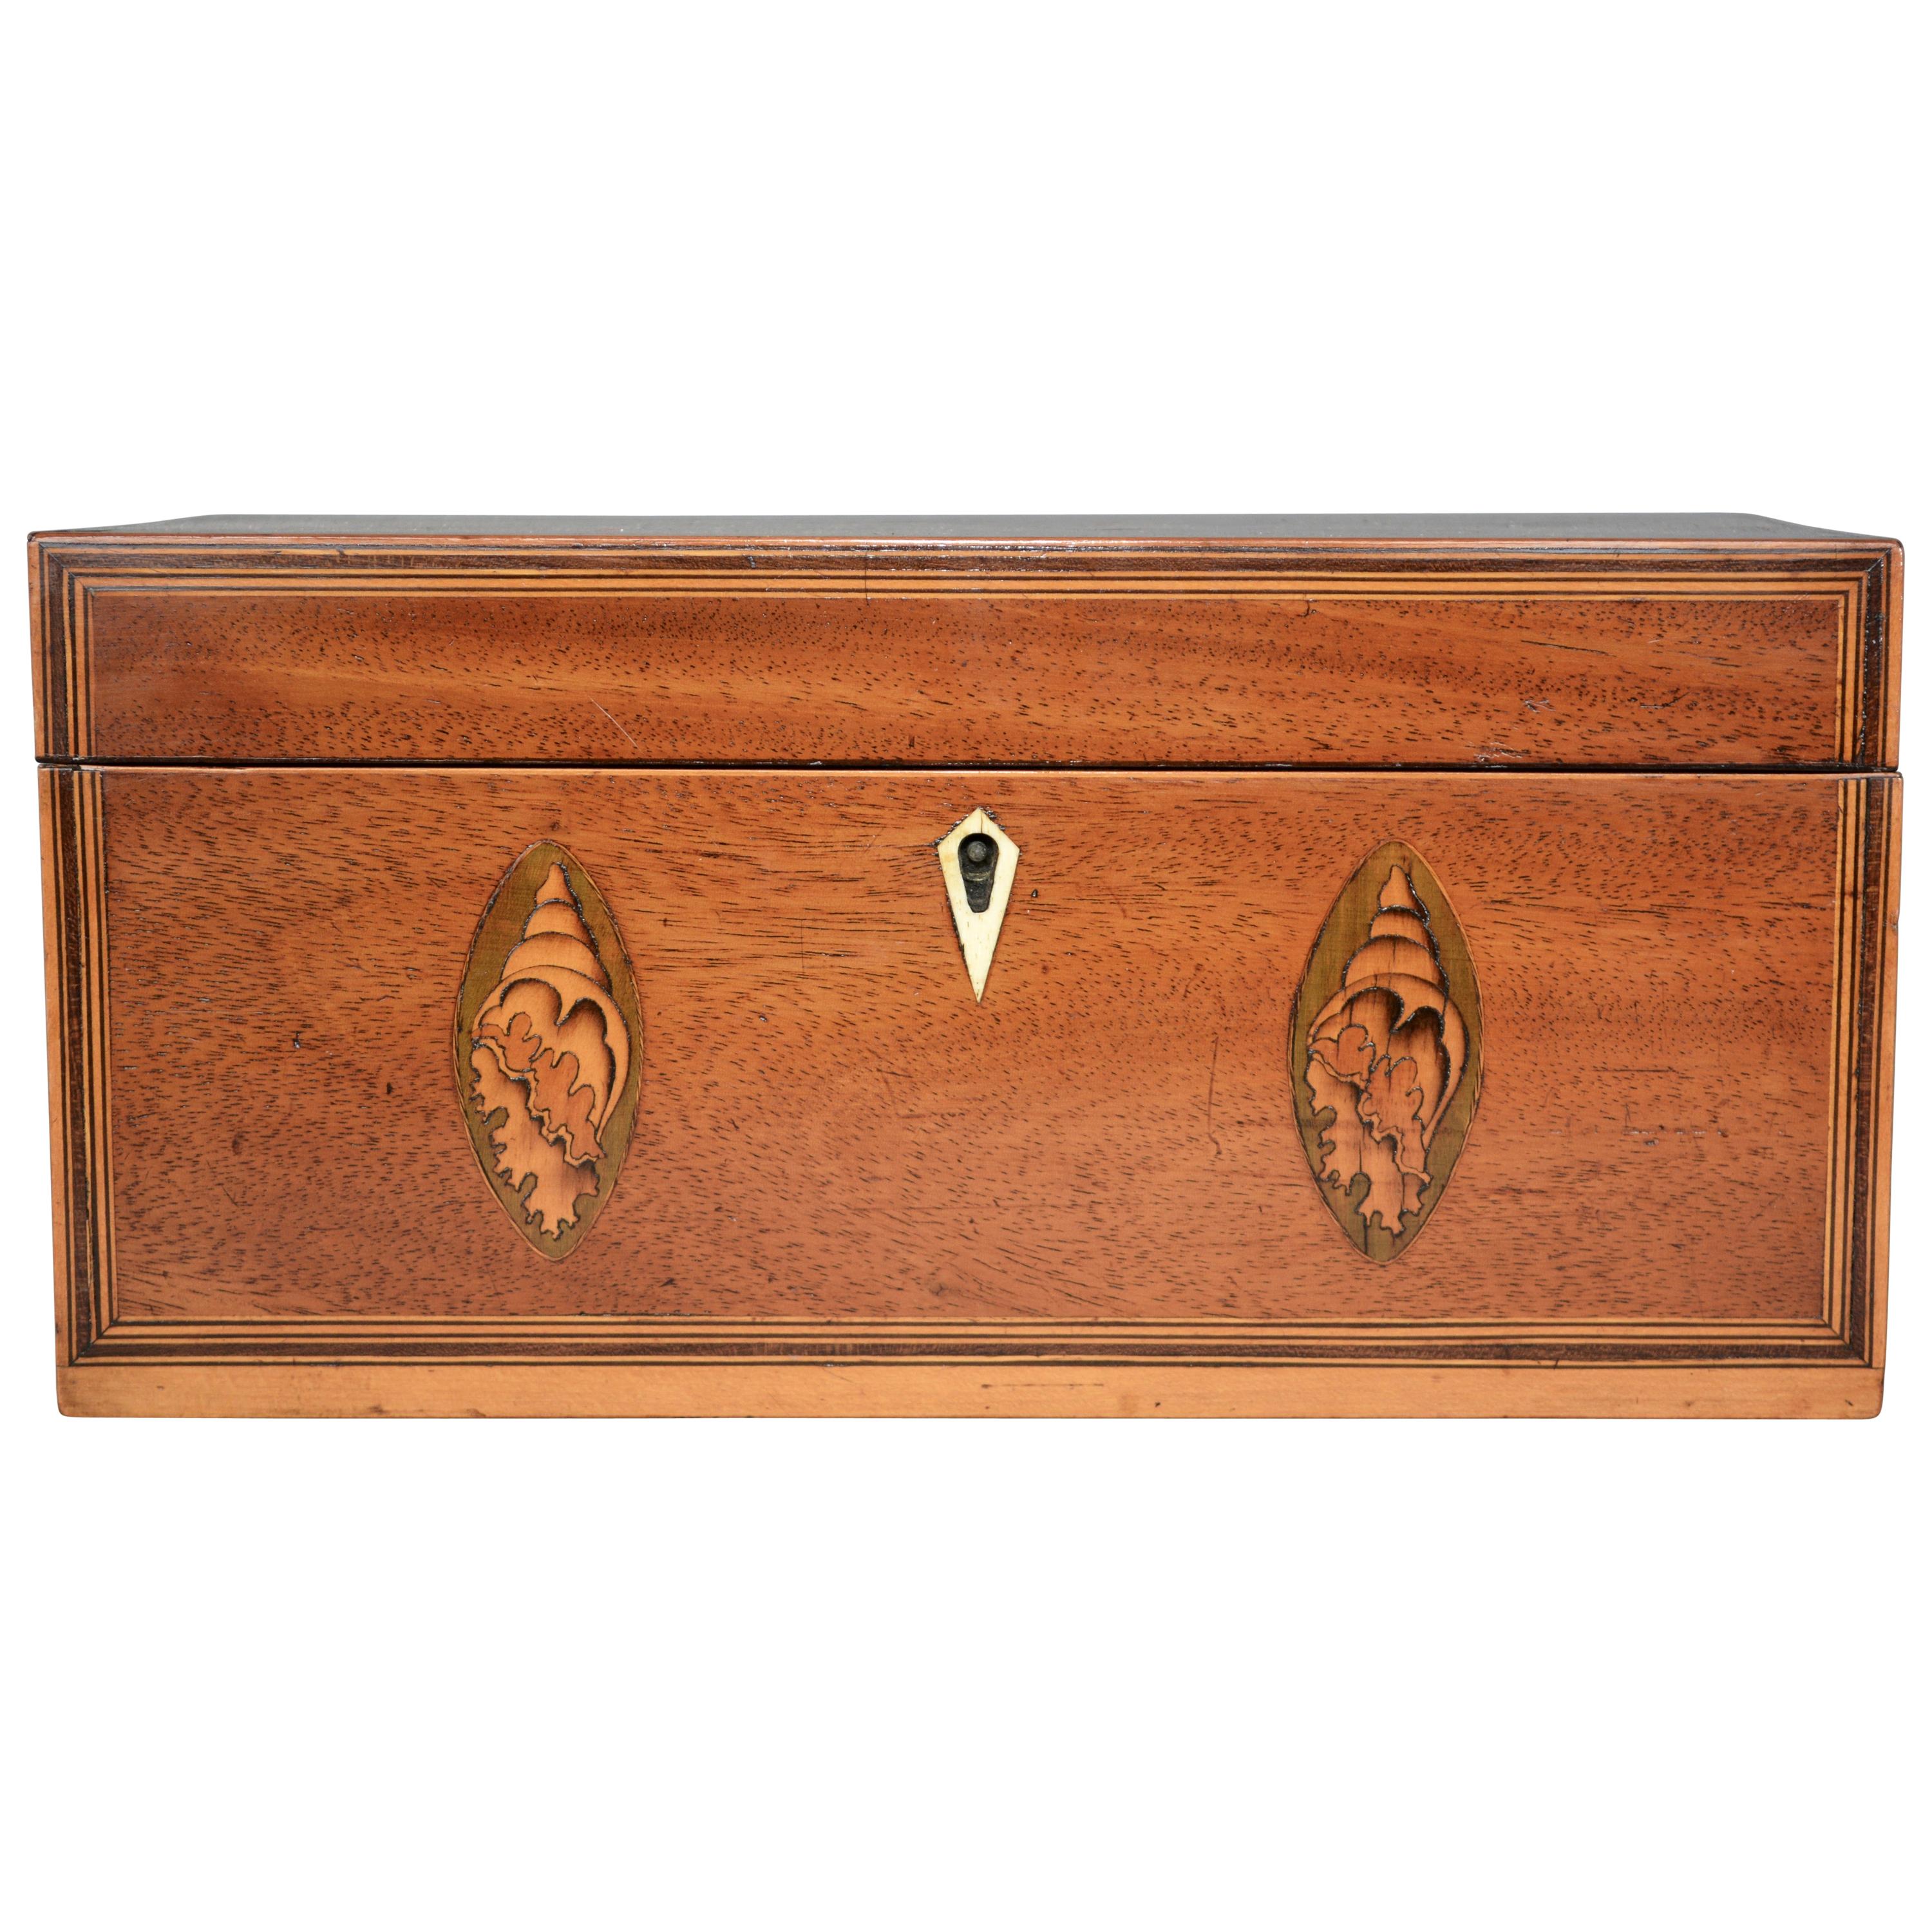 George III Mahogany Tea Caddy with Inlaid Shell and Flower Motifs C180